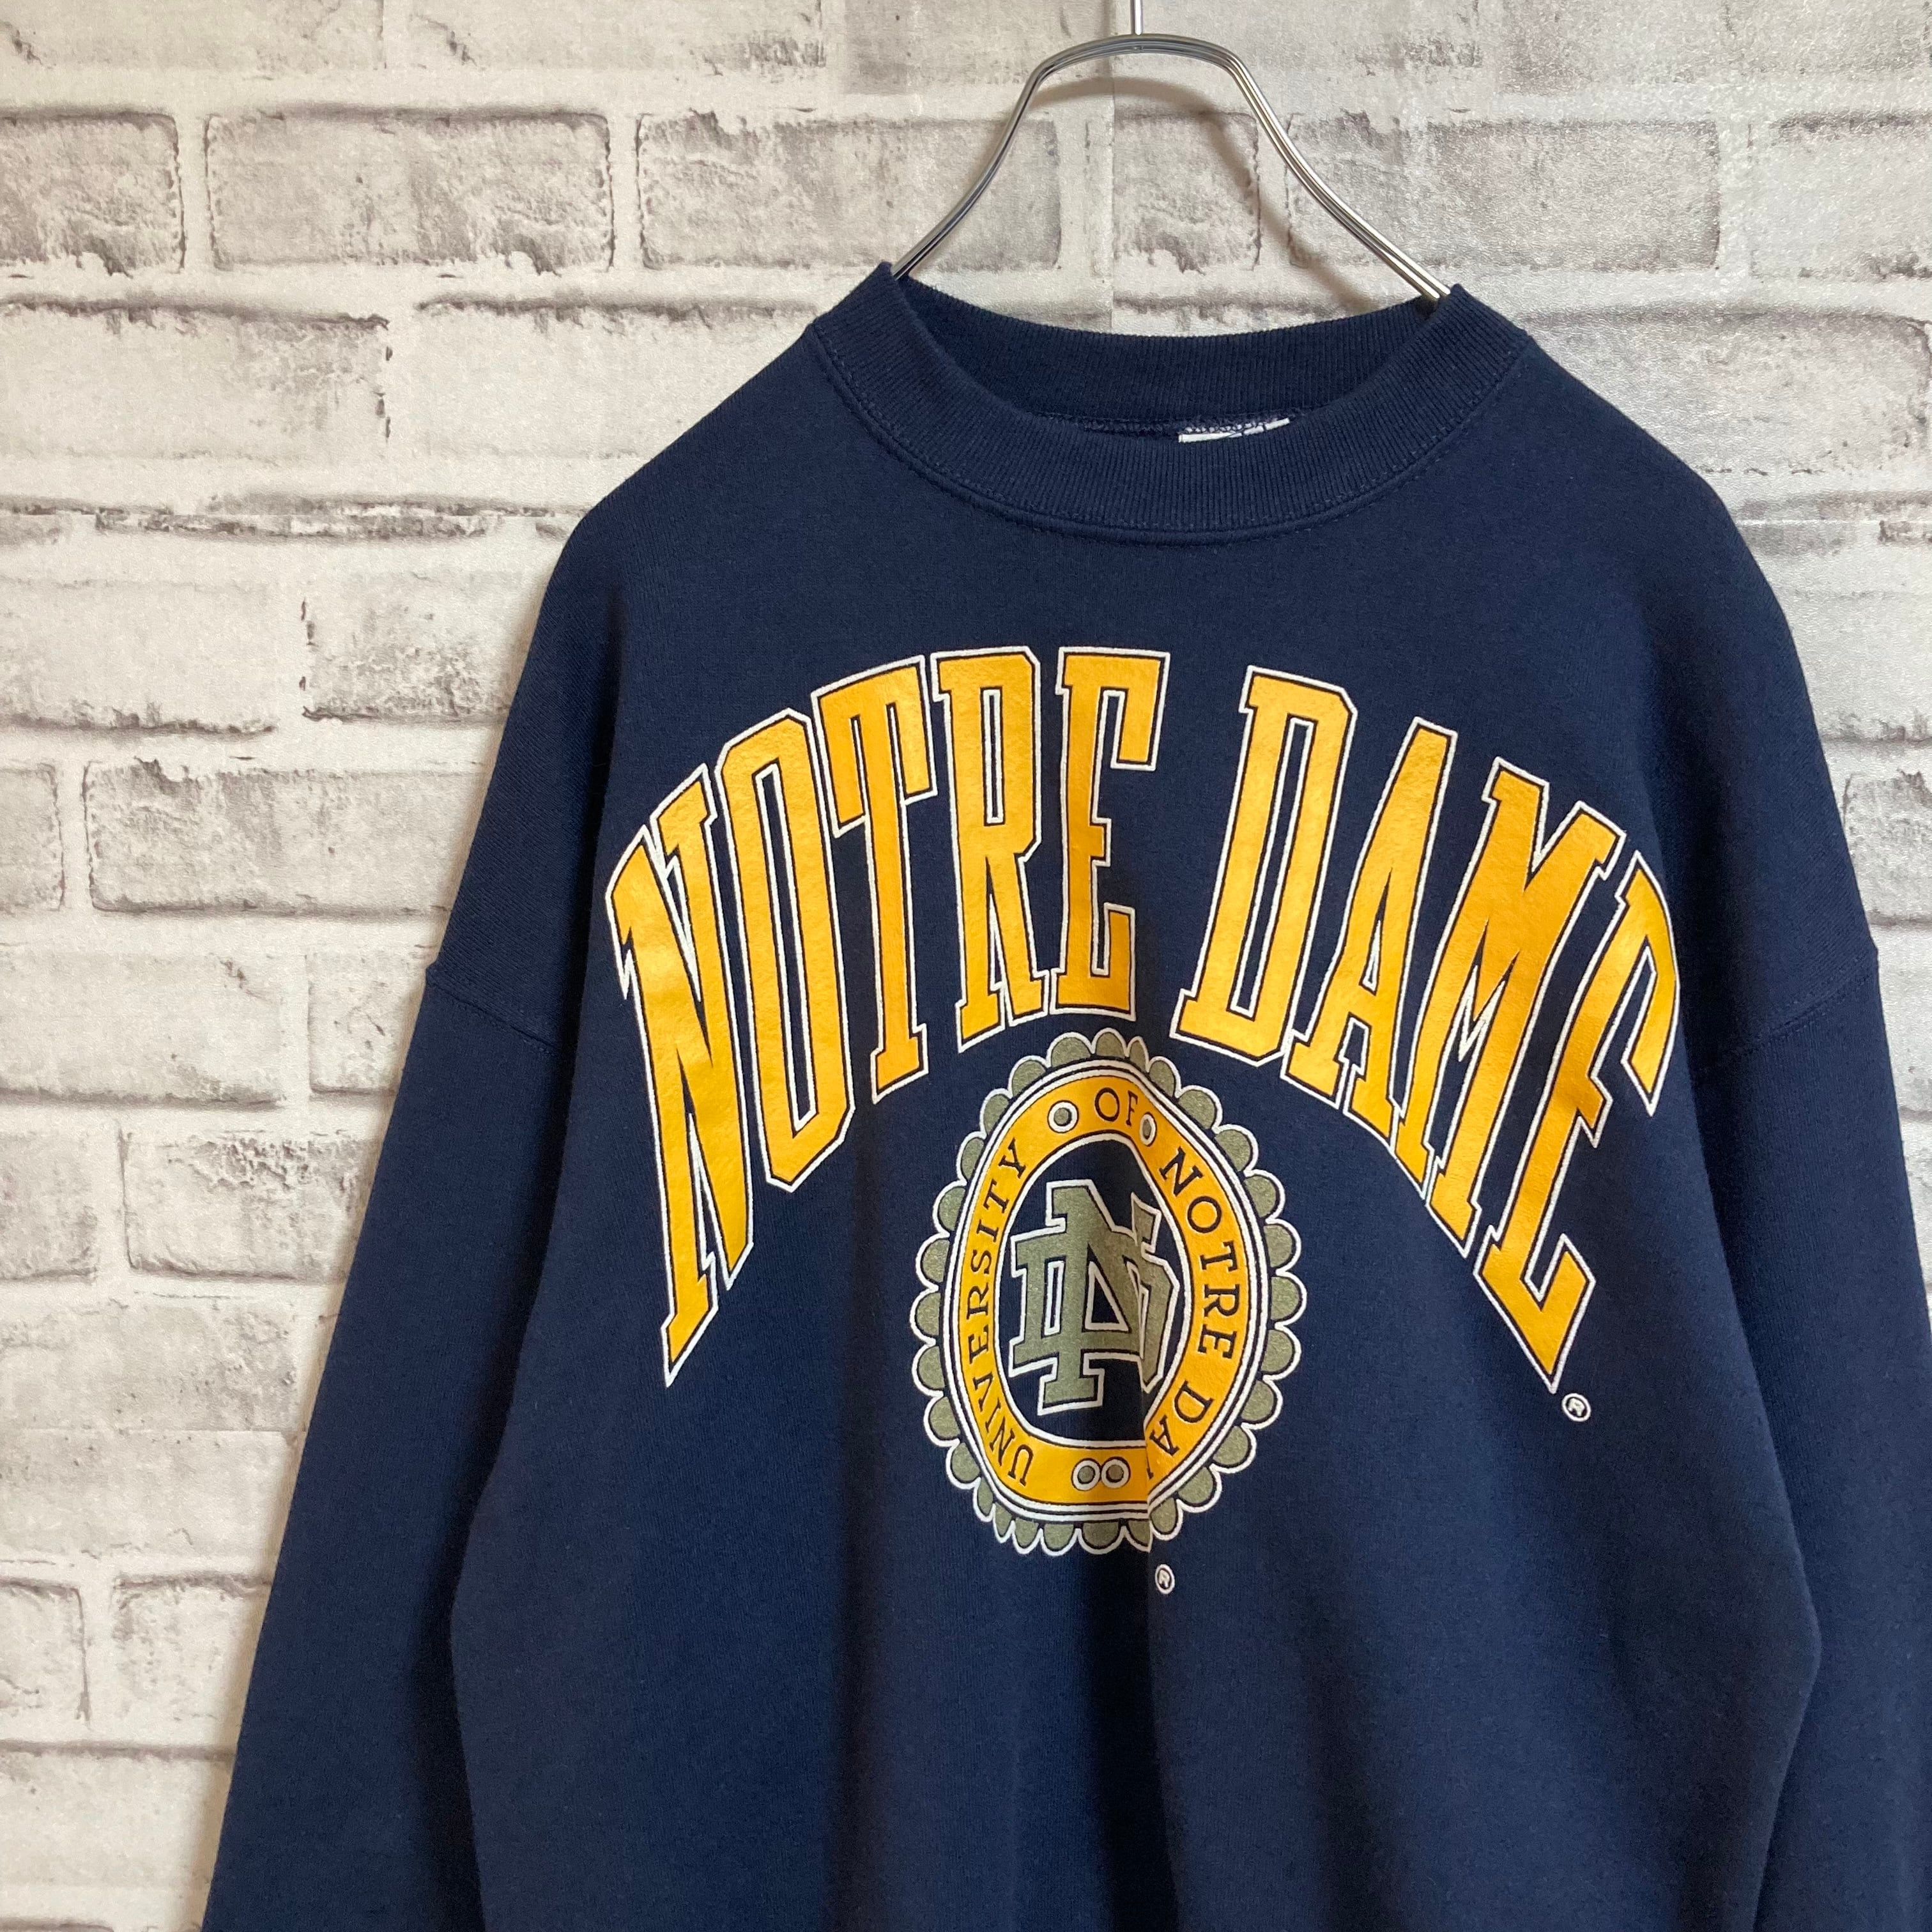 GALT SAND】L/S Sweat L Made in USA 90s “NOTRE DAME” スウェット ...